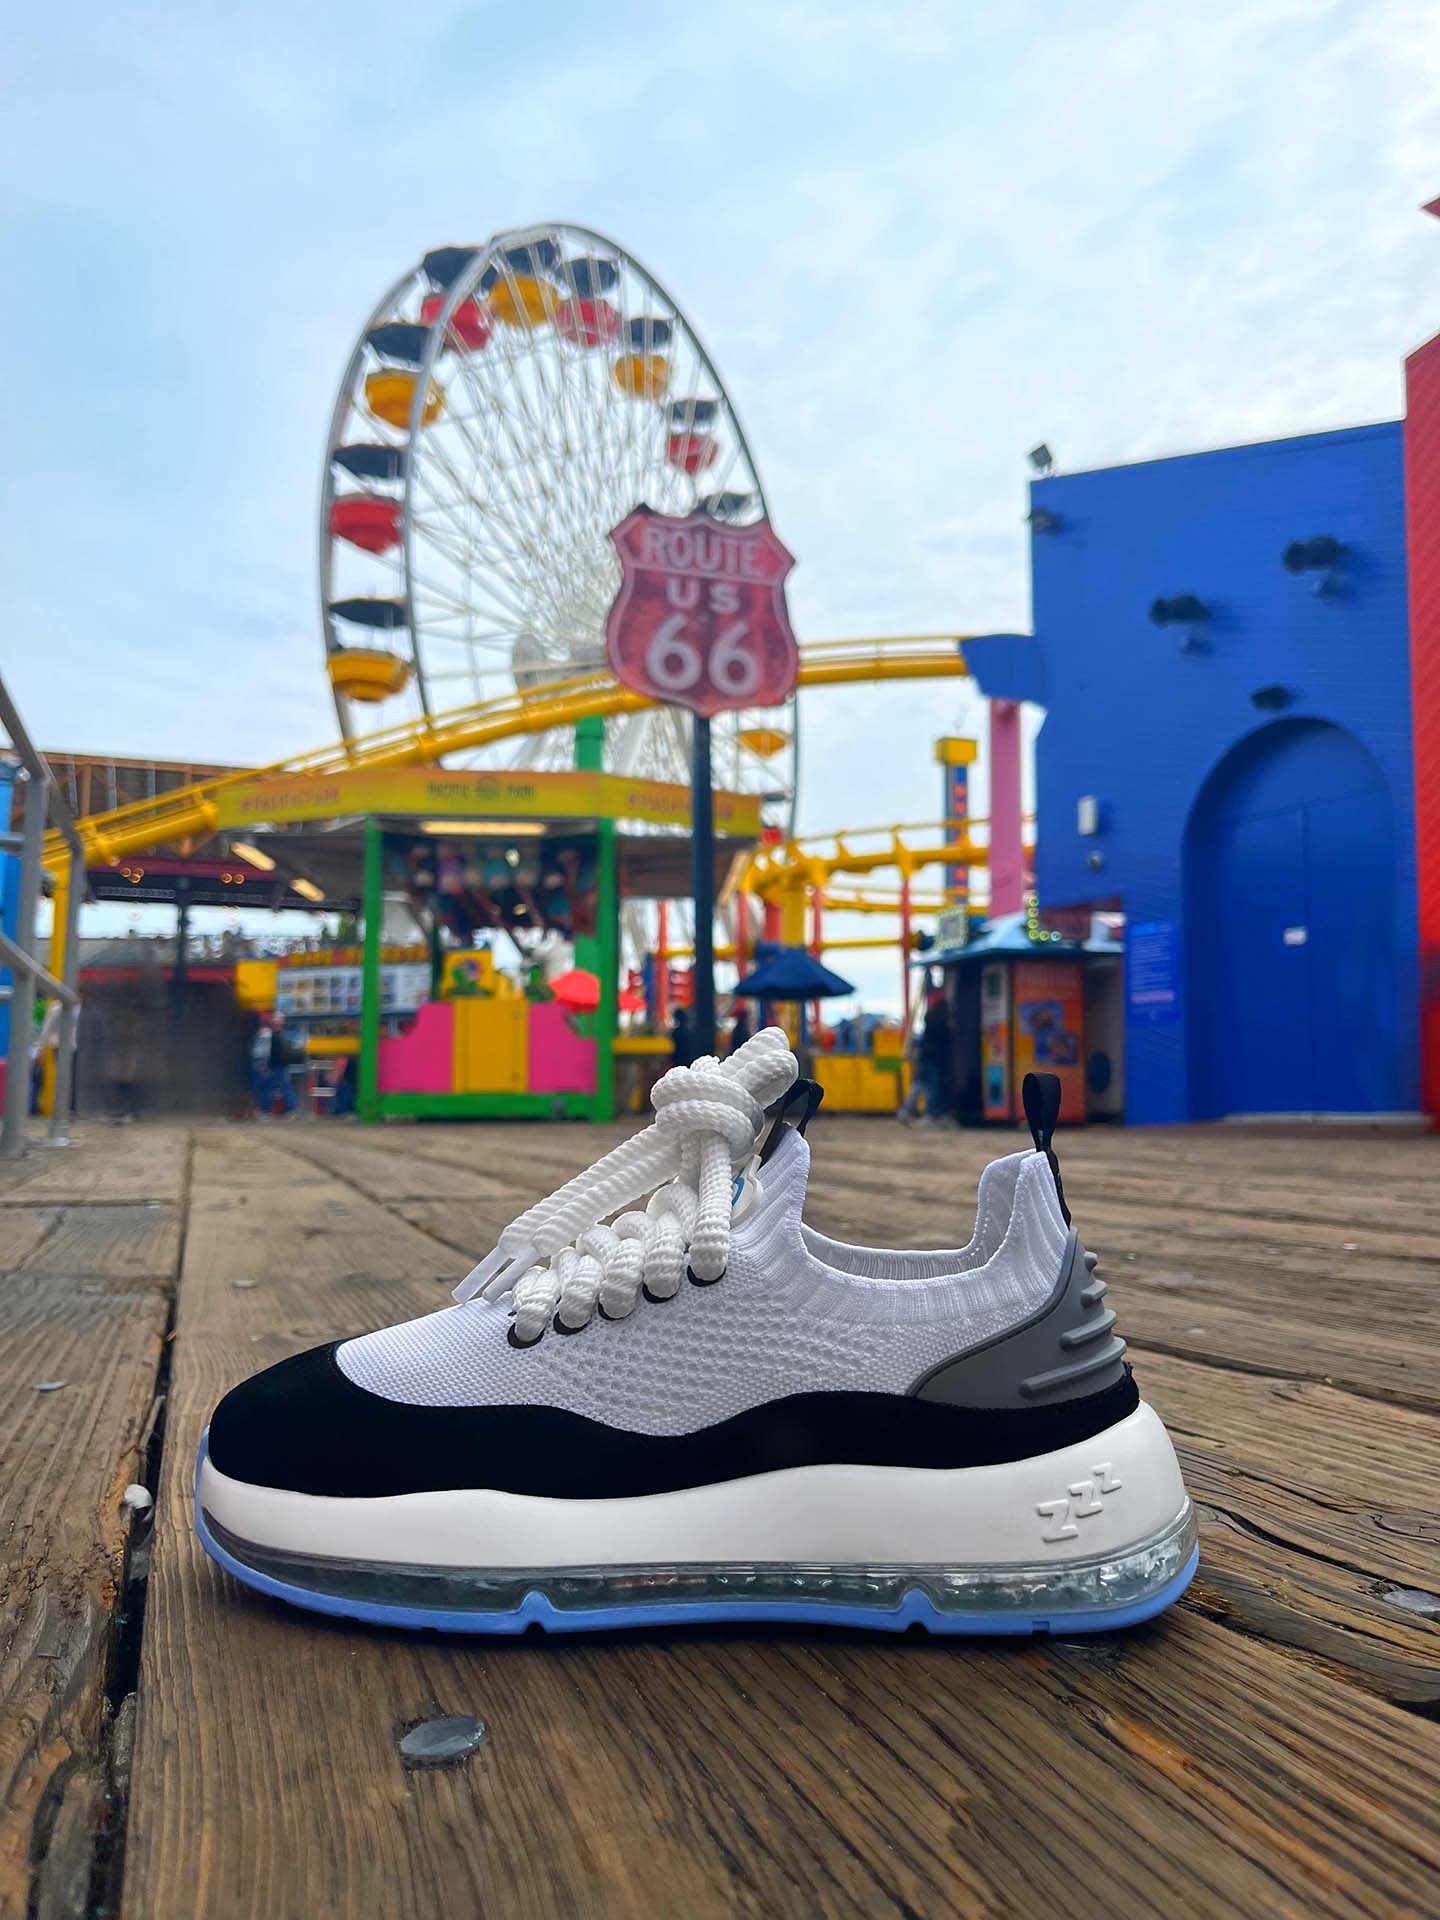 Image of shoe at the fair